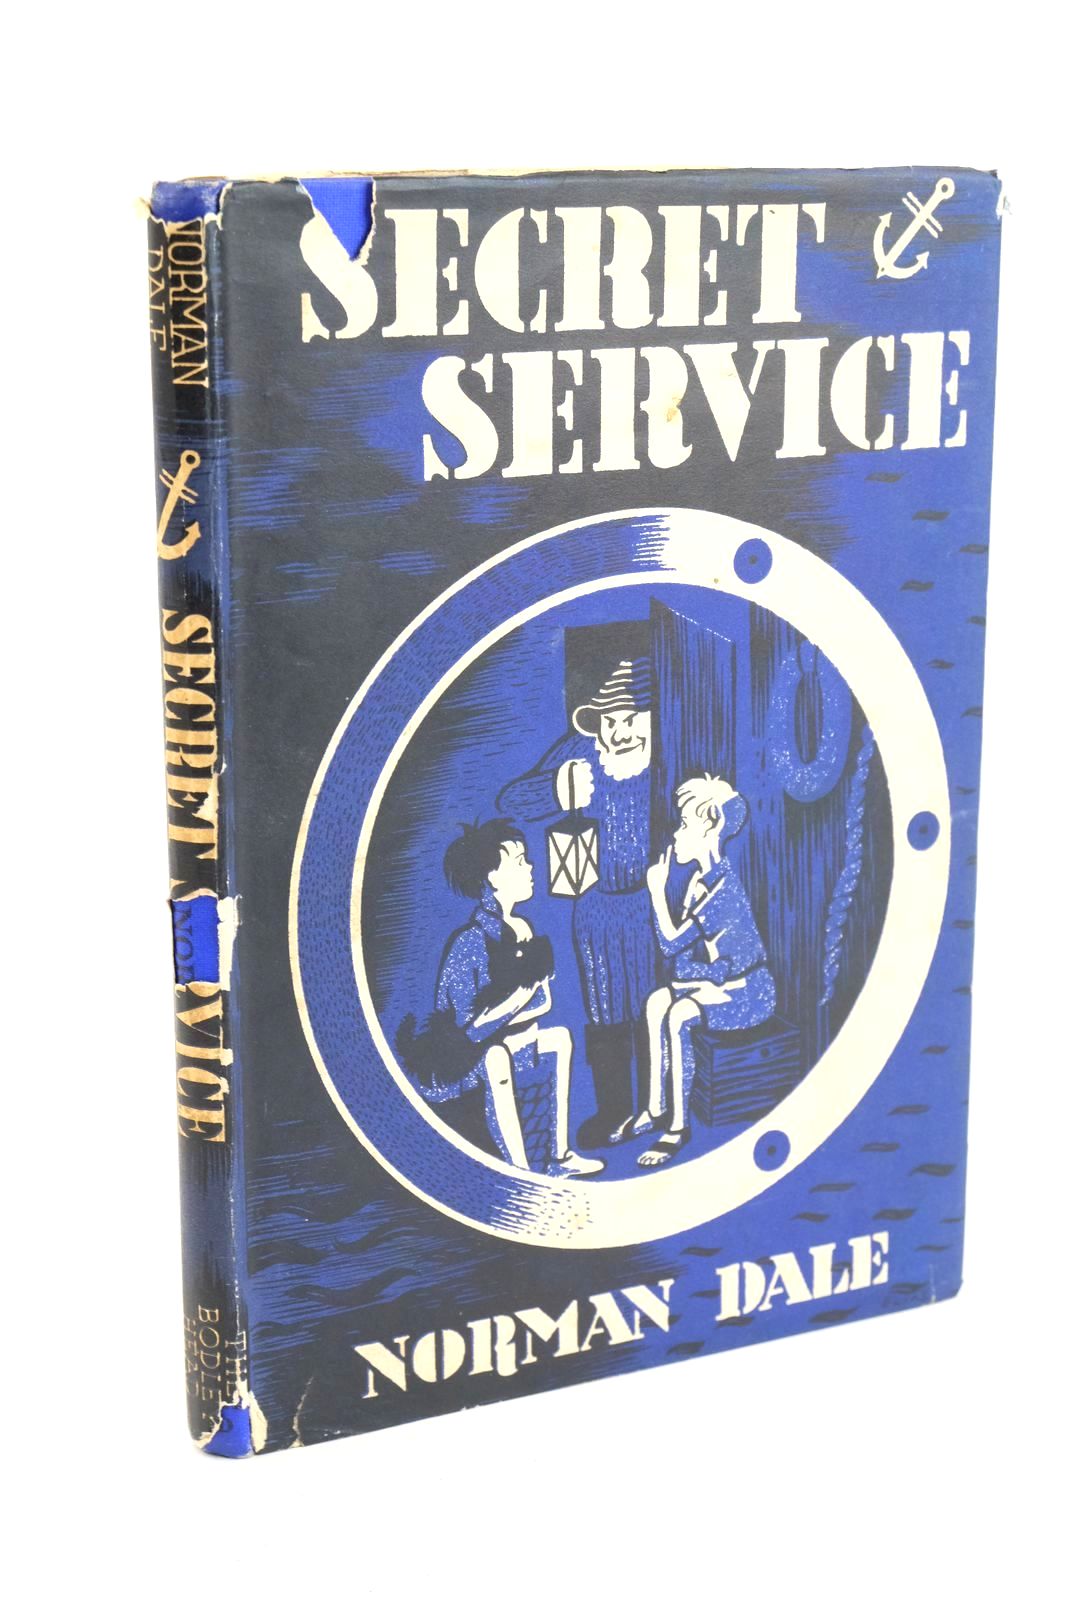 Photo of SECRET SERVICE! written by Dale, Norman illustrated by Elias, Gertrude published by John Lane The Bodley Head Limited (STOCK CODE: 1323694)  for sale by Stella & Rose's Books